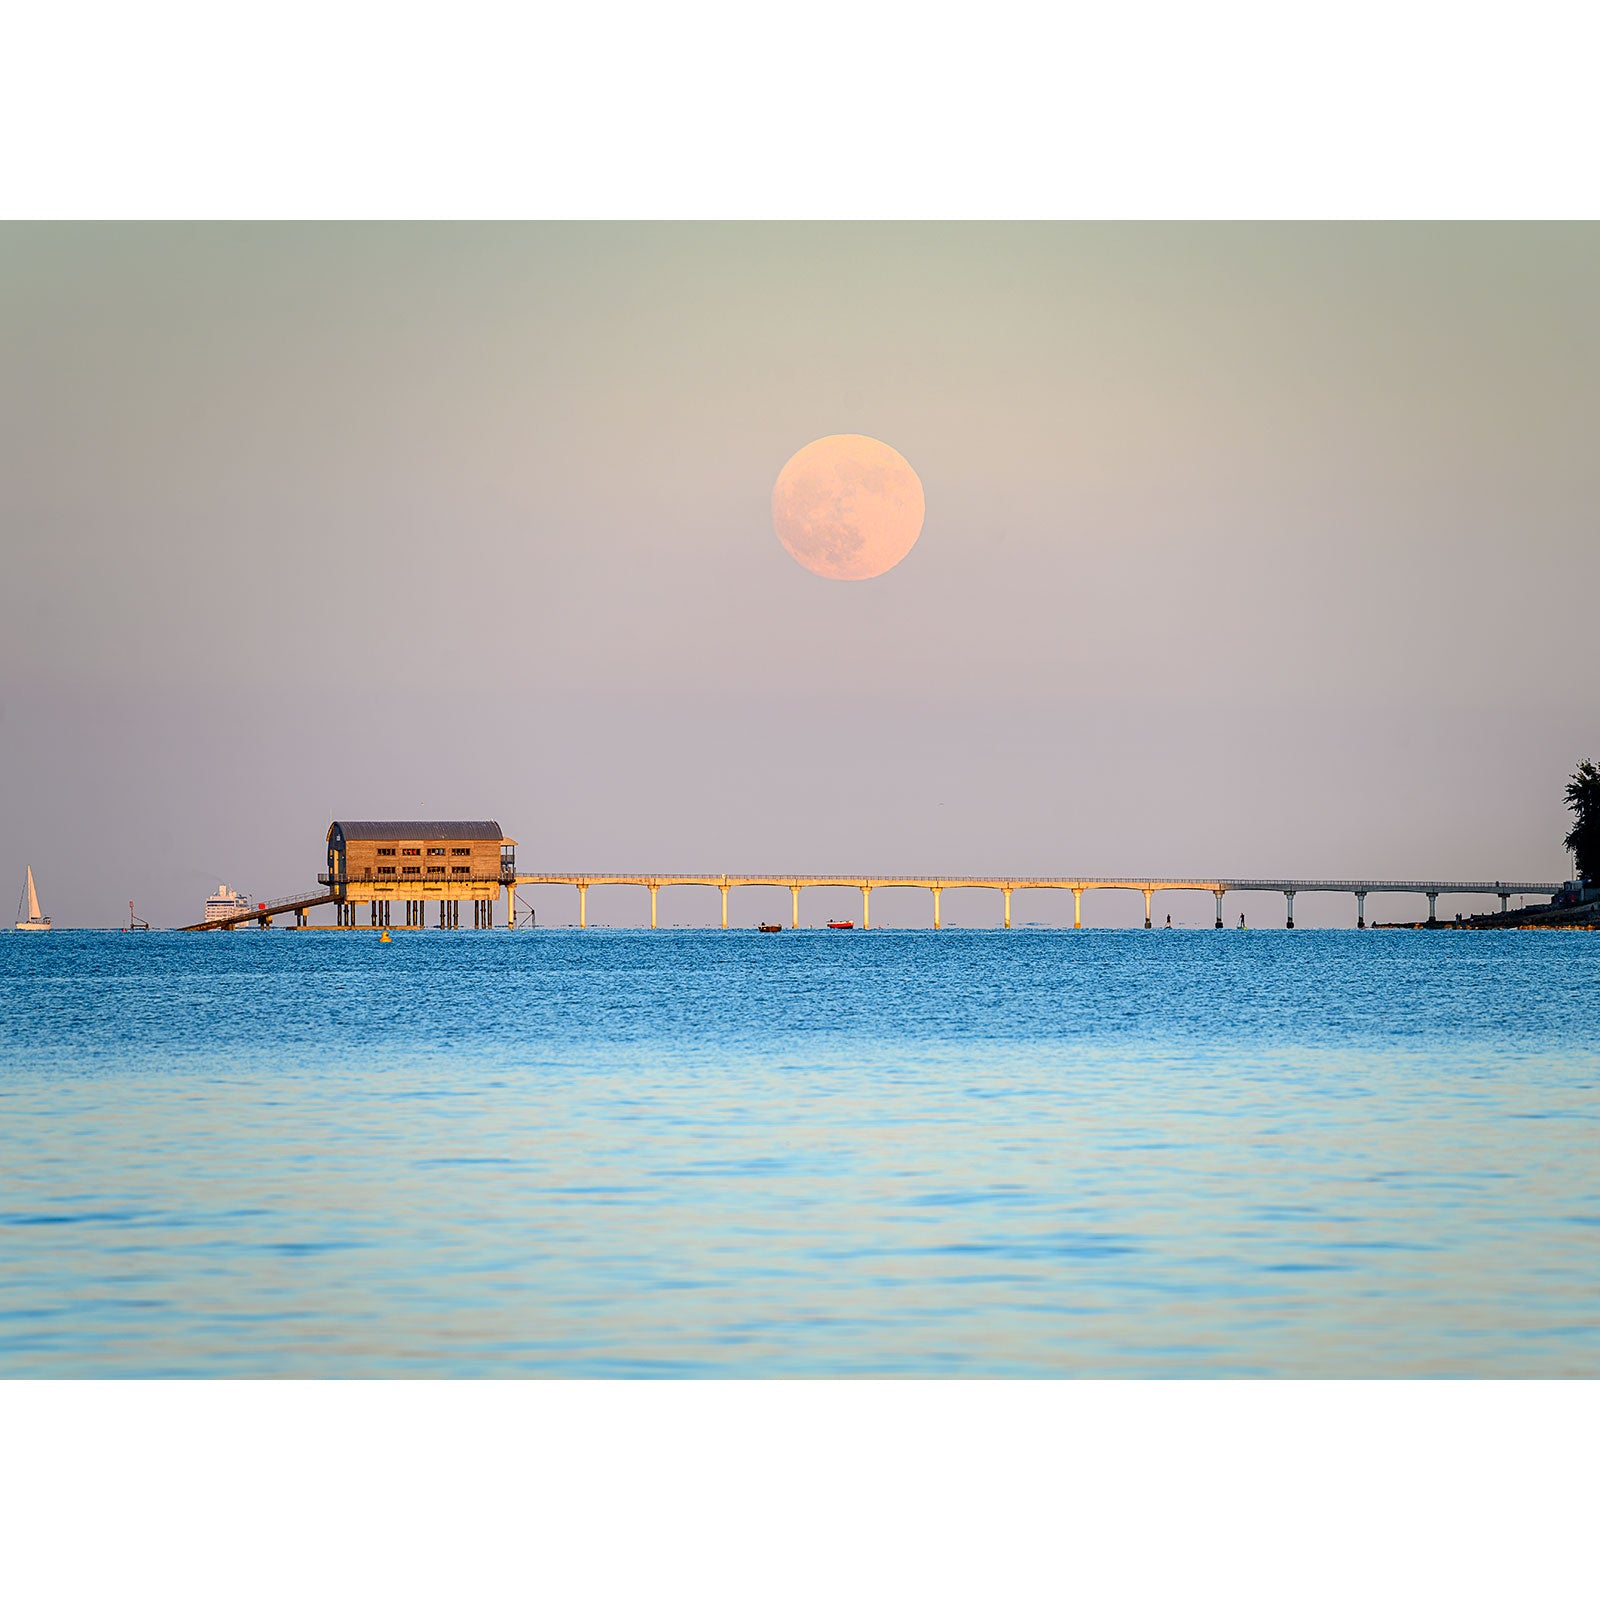 A Moonrise over Bembridge Lifeboat Station rises over a tranquil sea with a pier in the background during twilight on the Isle of Wight, captured beautifully by Available Light Photography.